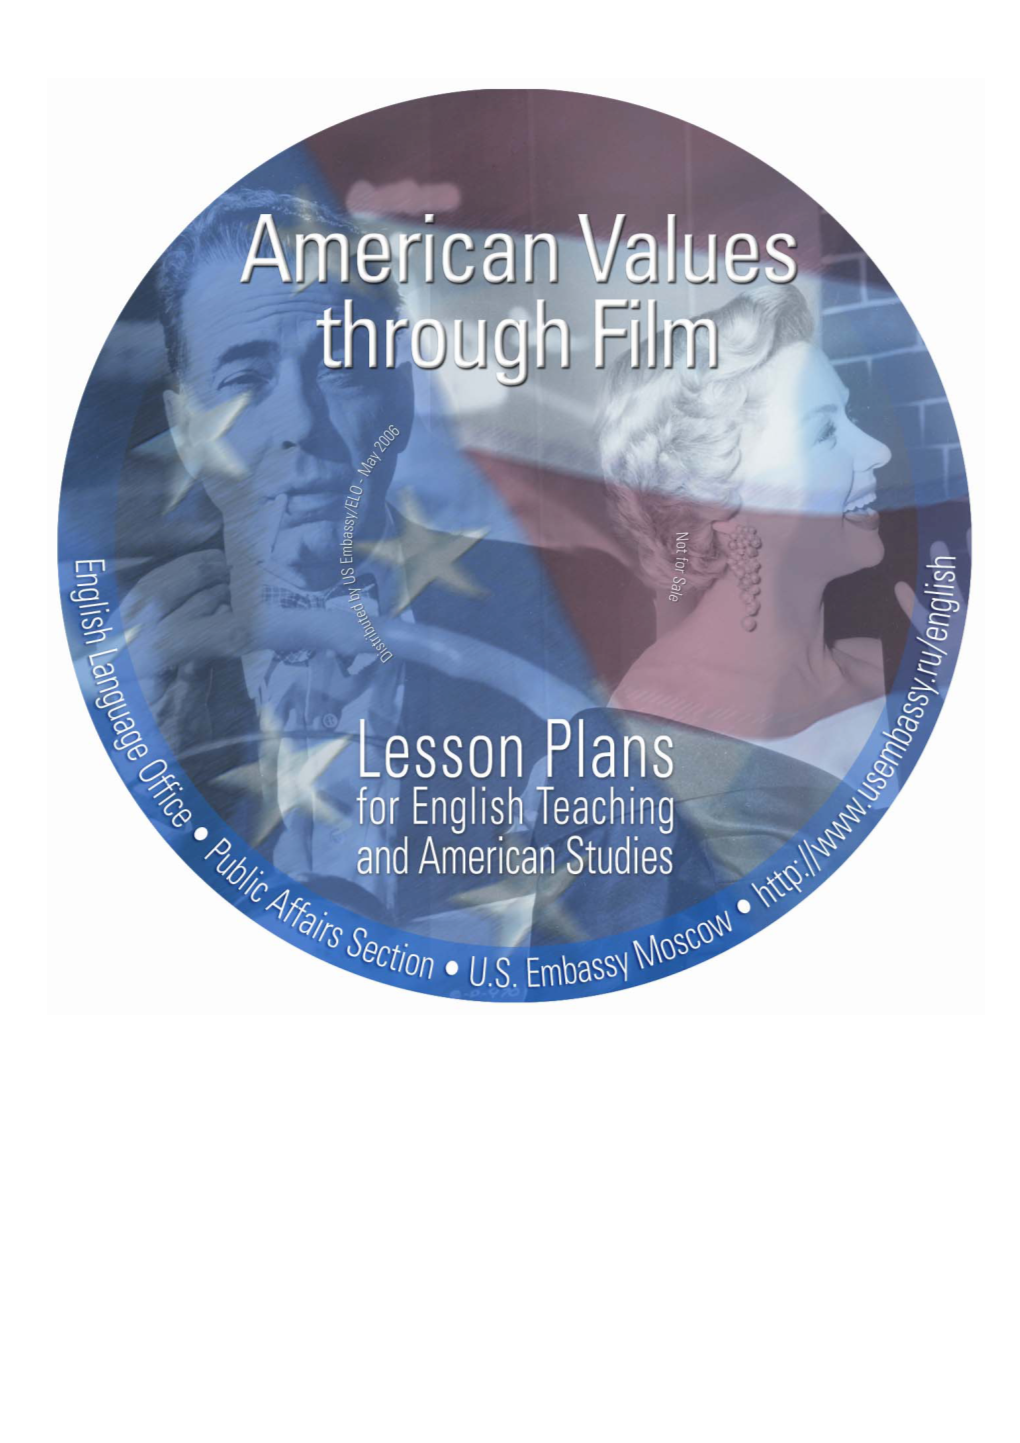 Lesson Plans for Teaching English and American Studies